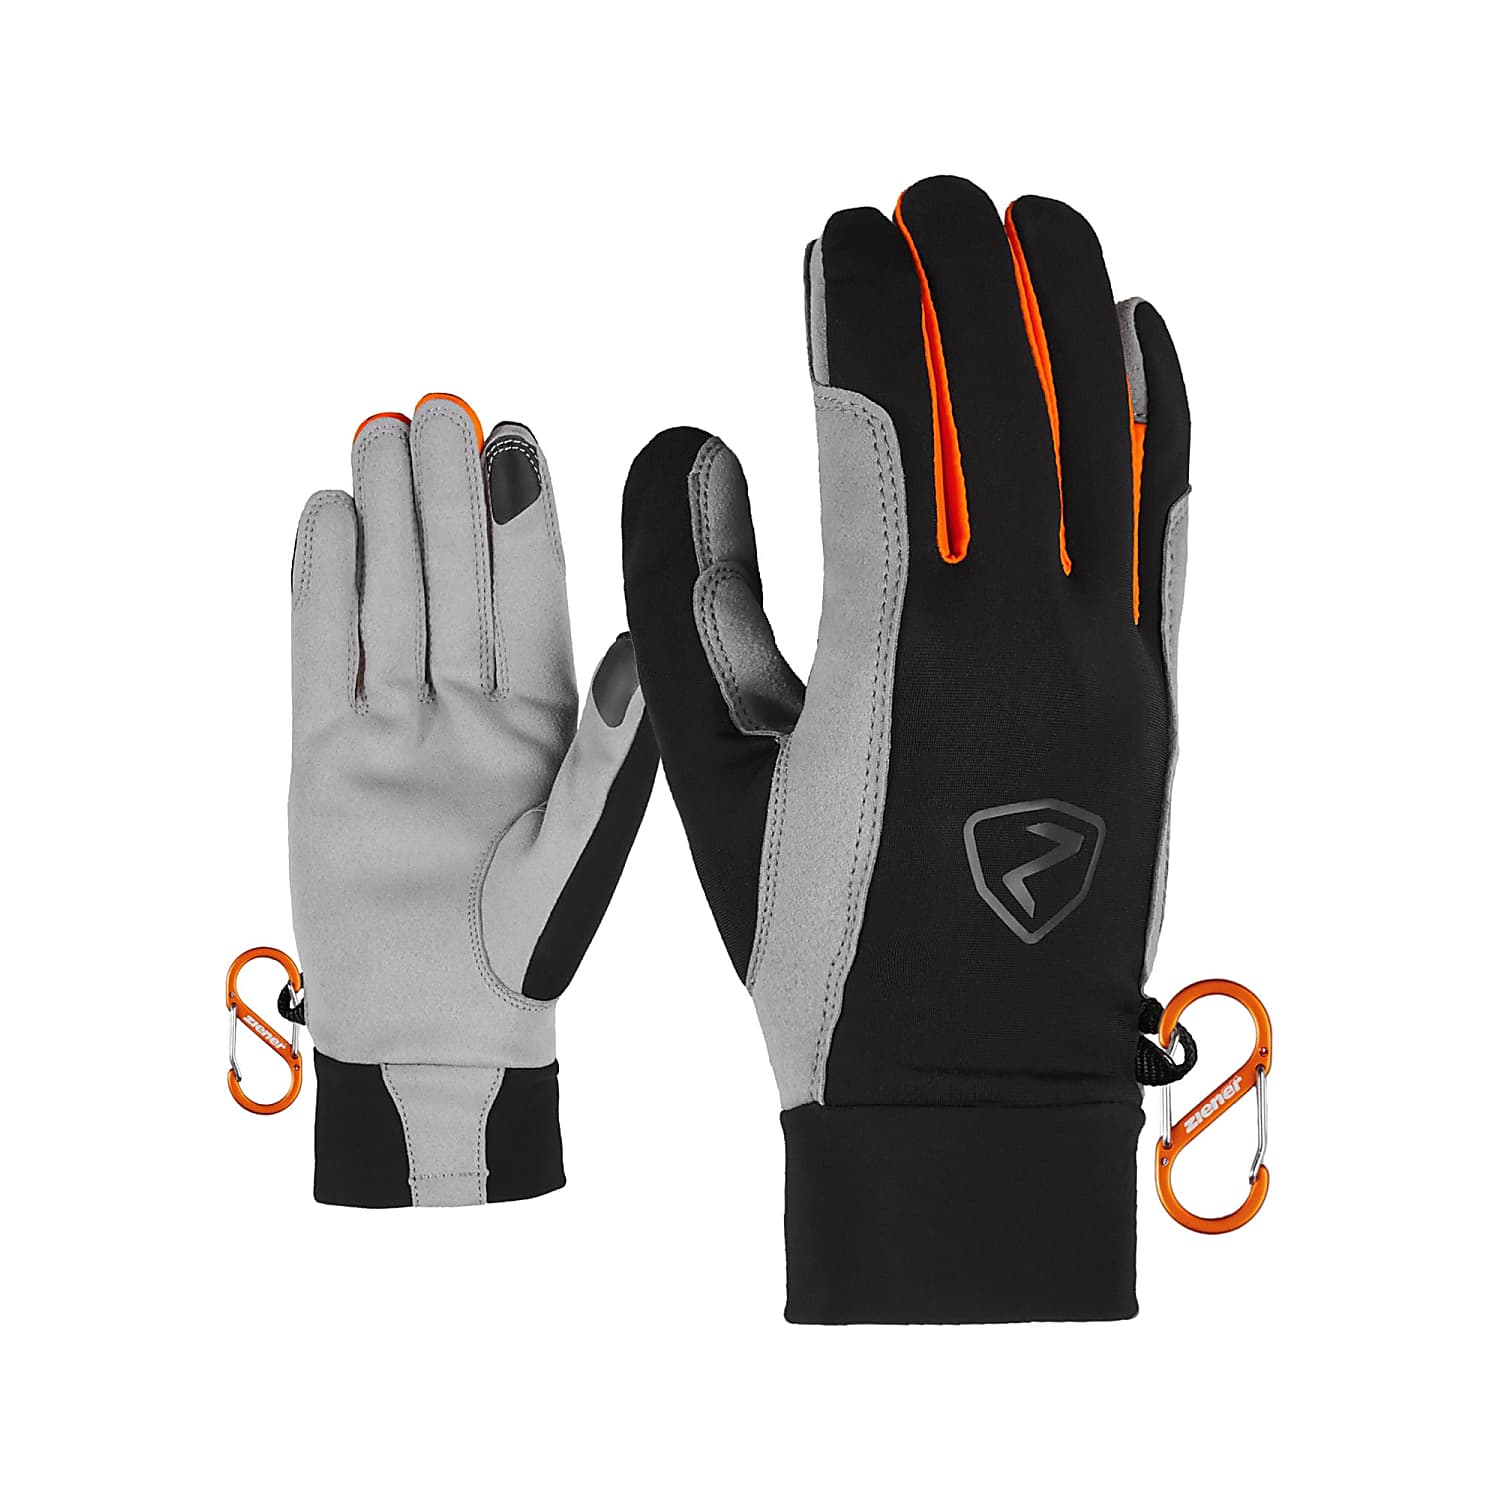 Fast - - GUSTY shipping cheap New Orange GLOVE, TOUCH and Ziener Black